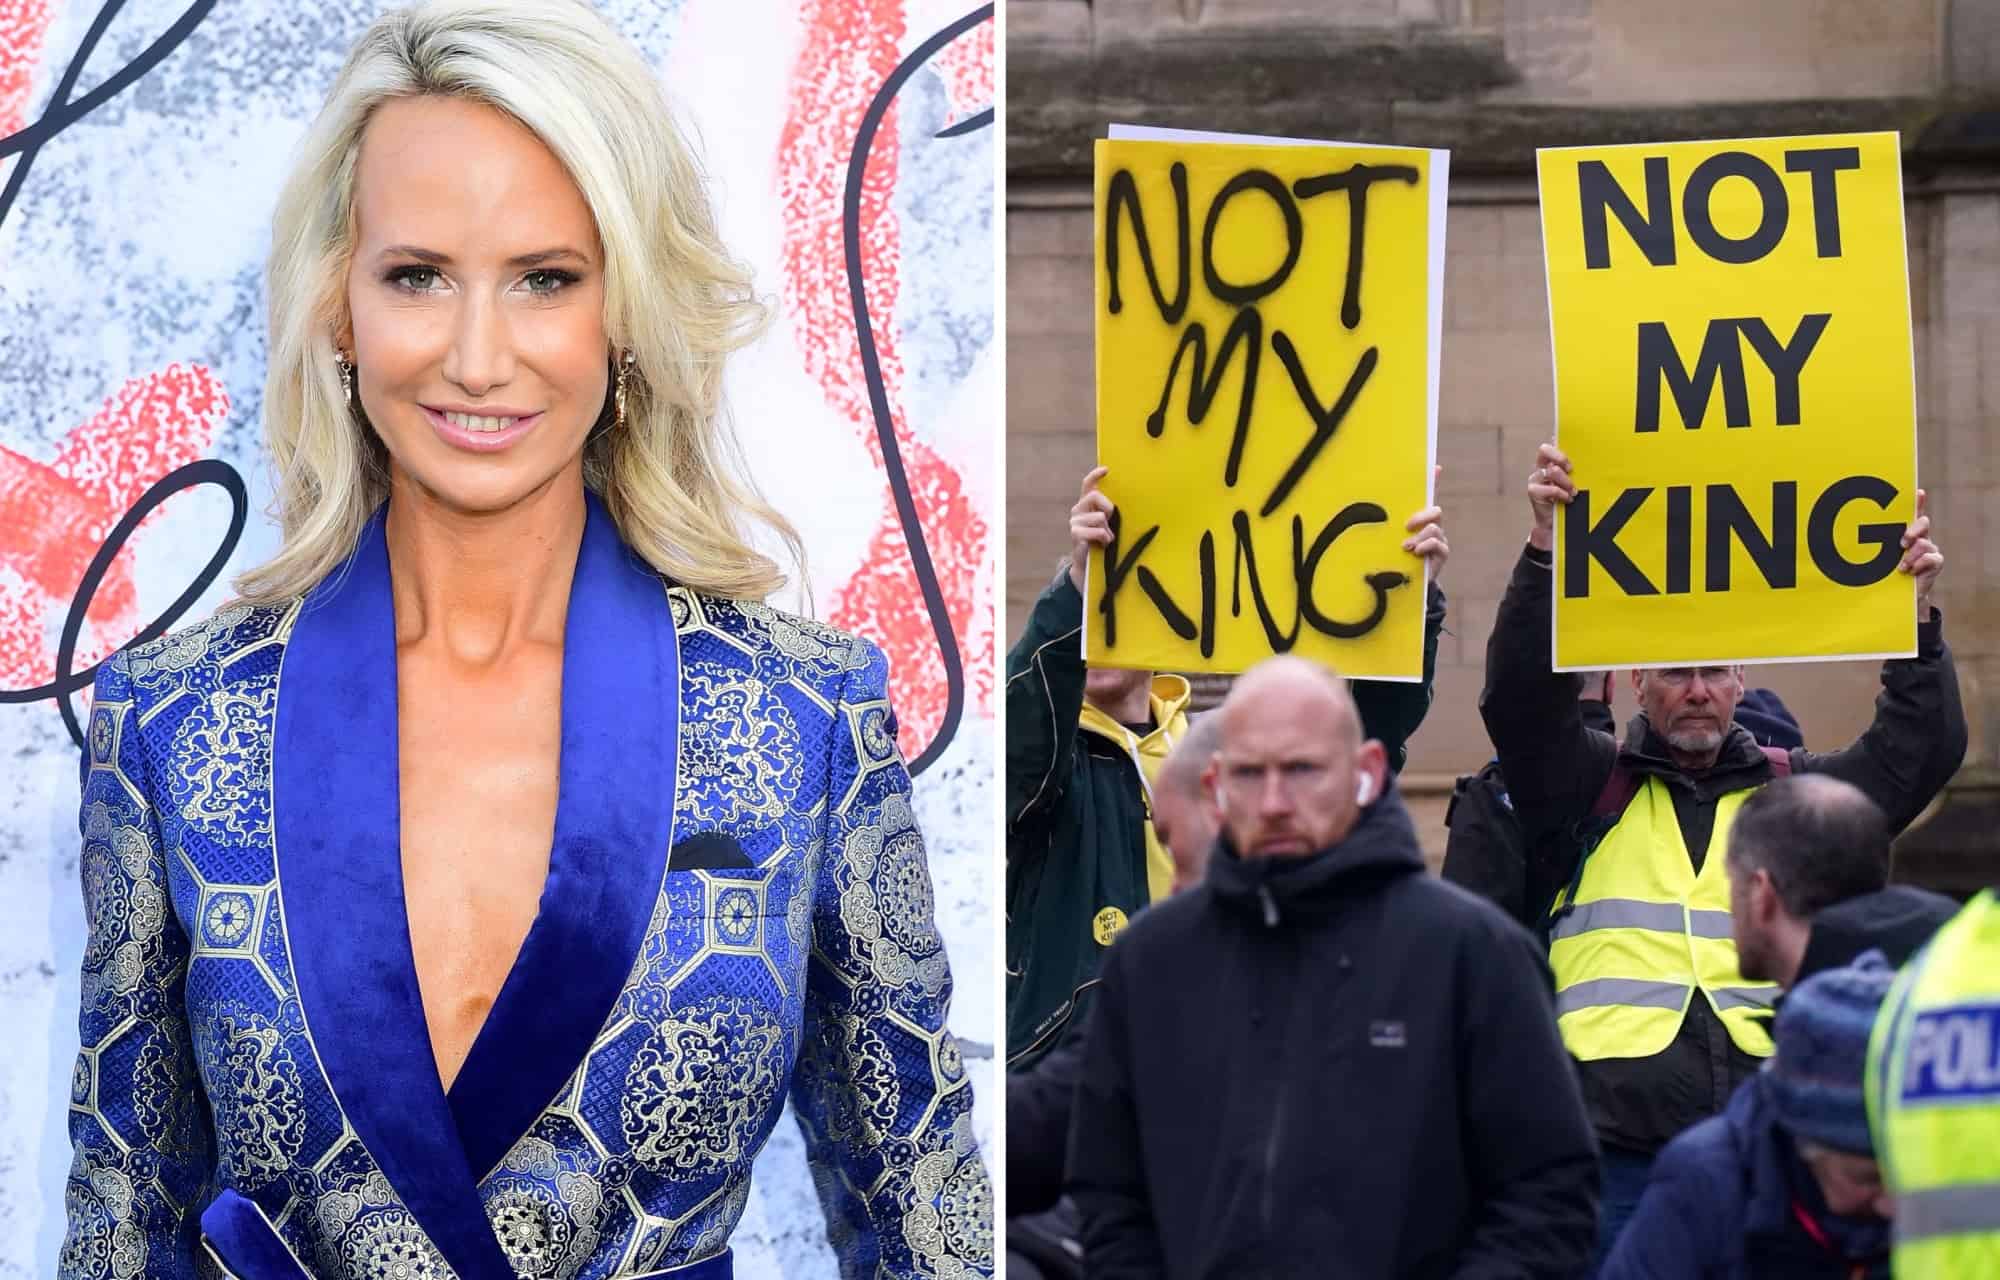 Lady Victoria Hervey says she would arrest anti-monarchists ahead of Coronation and release them after